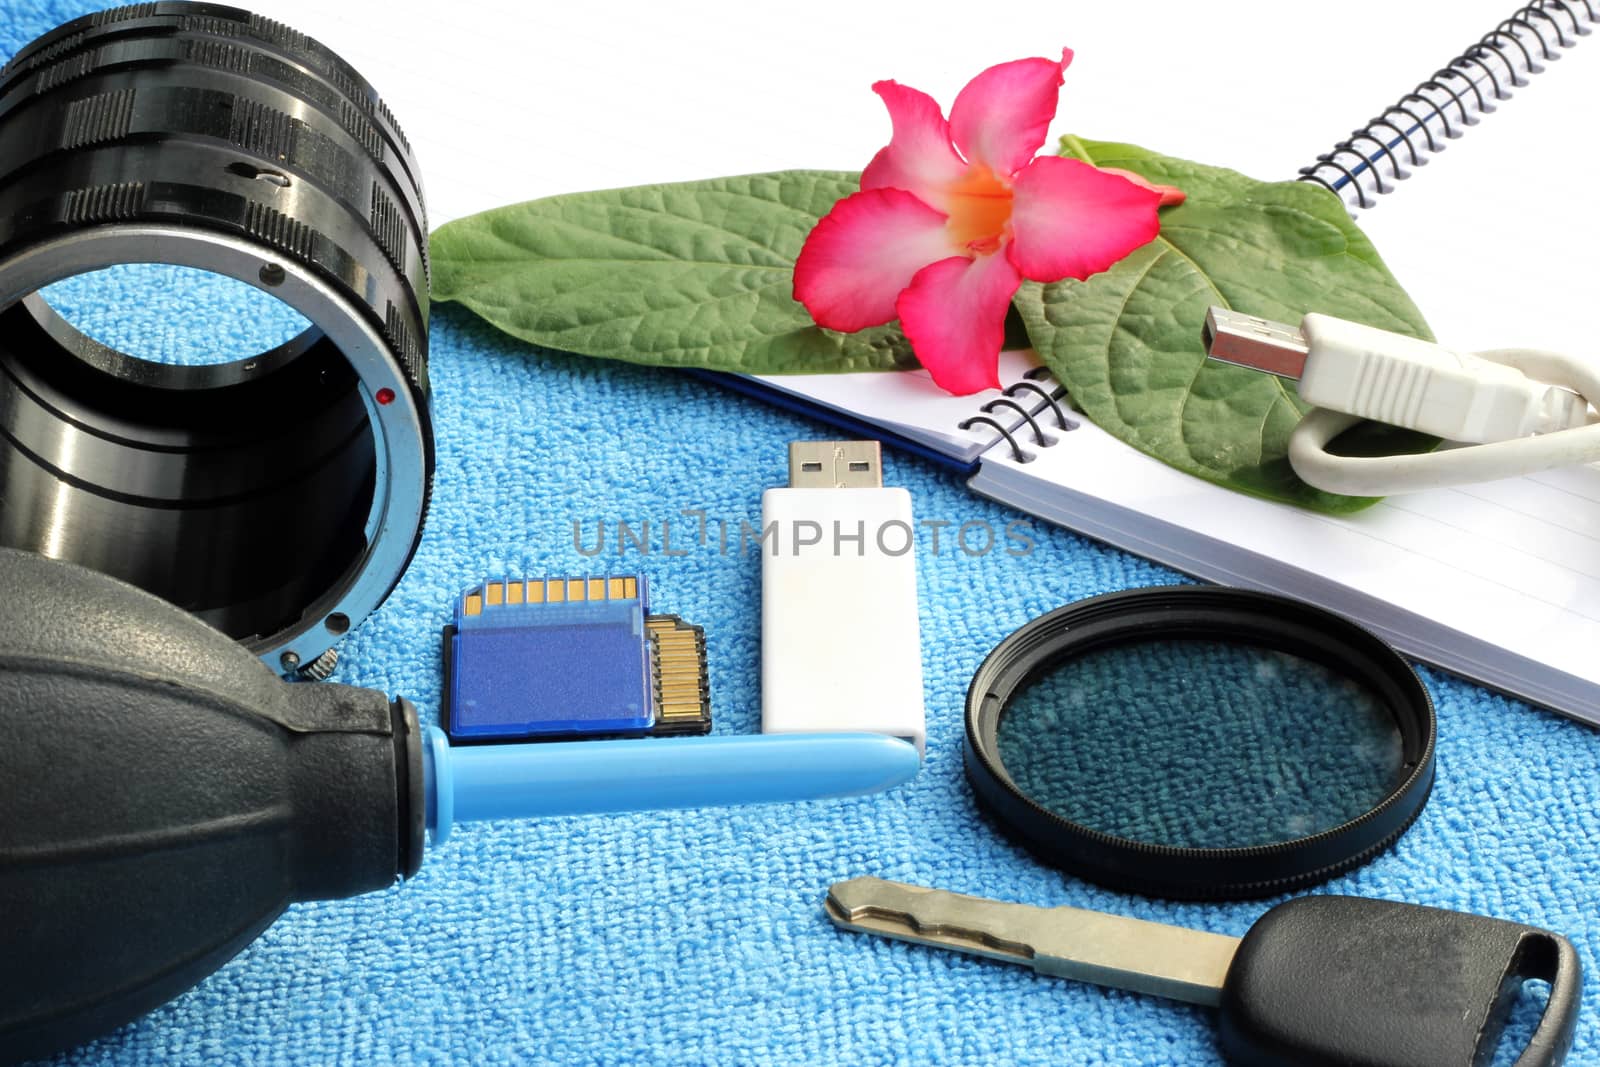 Accessories for traveler and photographer by ZONETEEn